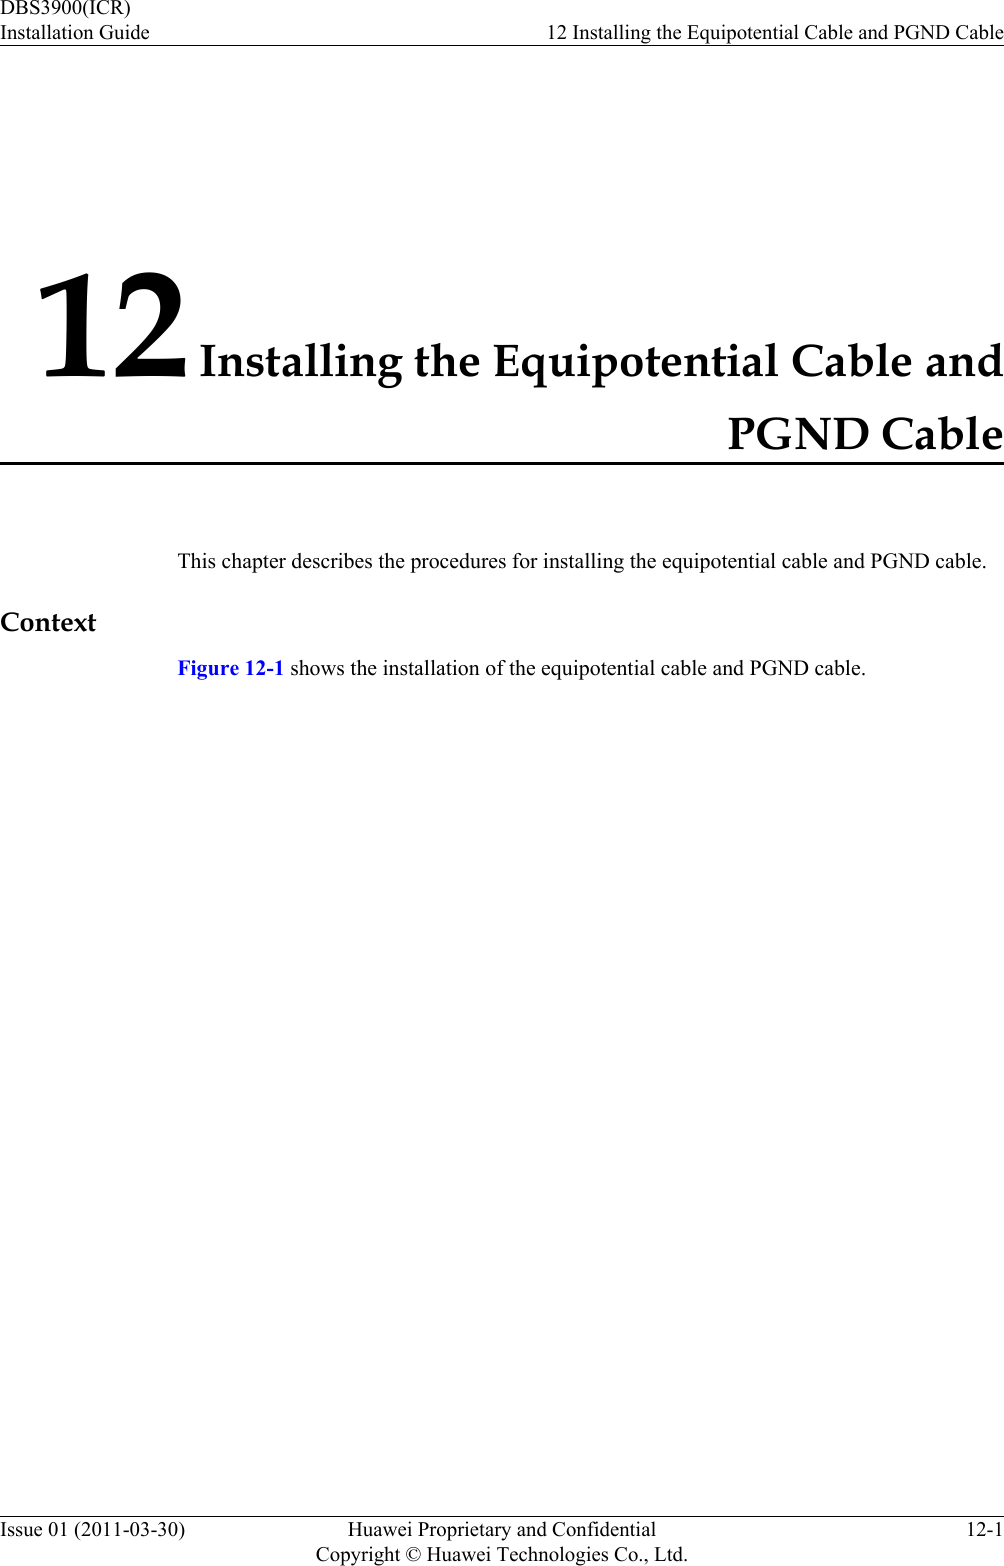 12 Installing the Equipotential Cable andPGND CableThis chapter describes the procedures for installing the equipotential cable and PGND cable.ContextFigure 12-1 shows the installation of the equipotential cable and PGND cable.DBS3900(ICR)Installation Guide 12 Installing the Equipotential Cable and PGND CableIssue 01 (2011-03-30) Huawei Proprietary and ConfidentialCopyright © Huawei Technologies Co., Ltd.12-1